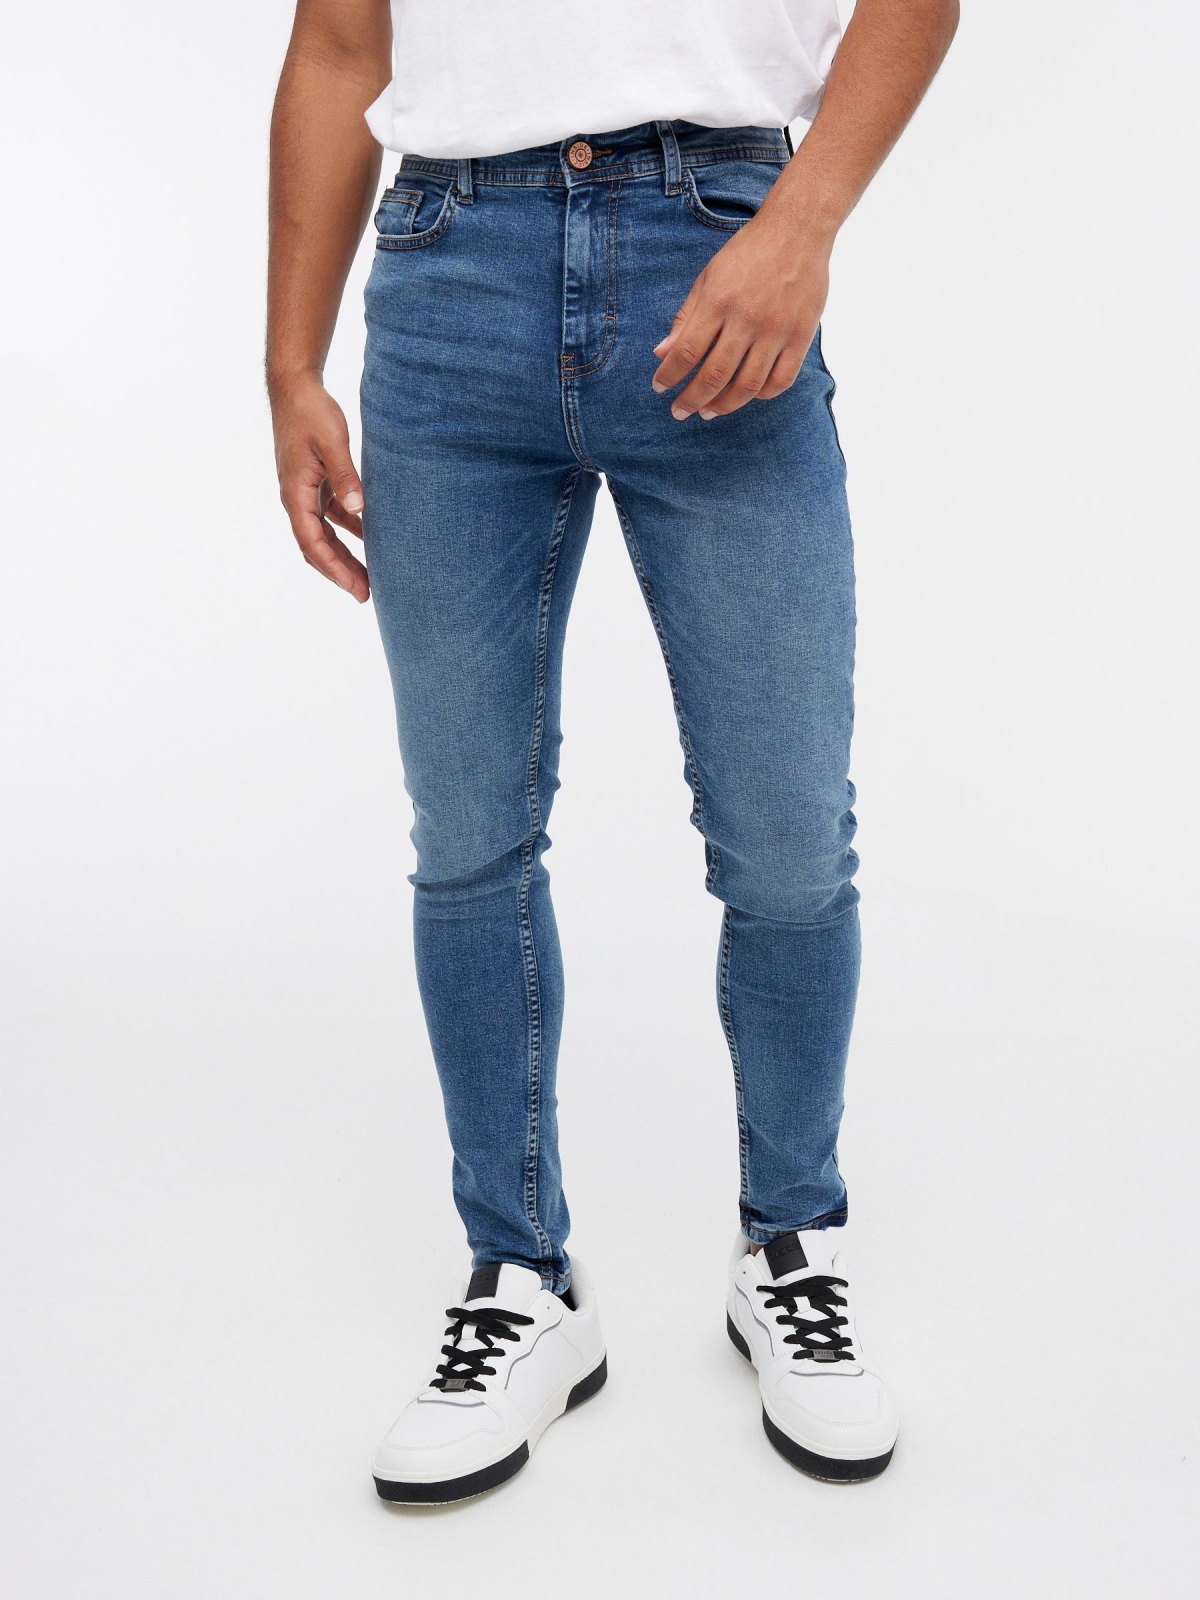 Carrot denim jeans blue middle front view